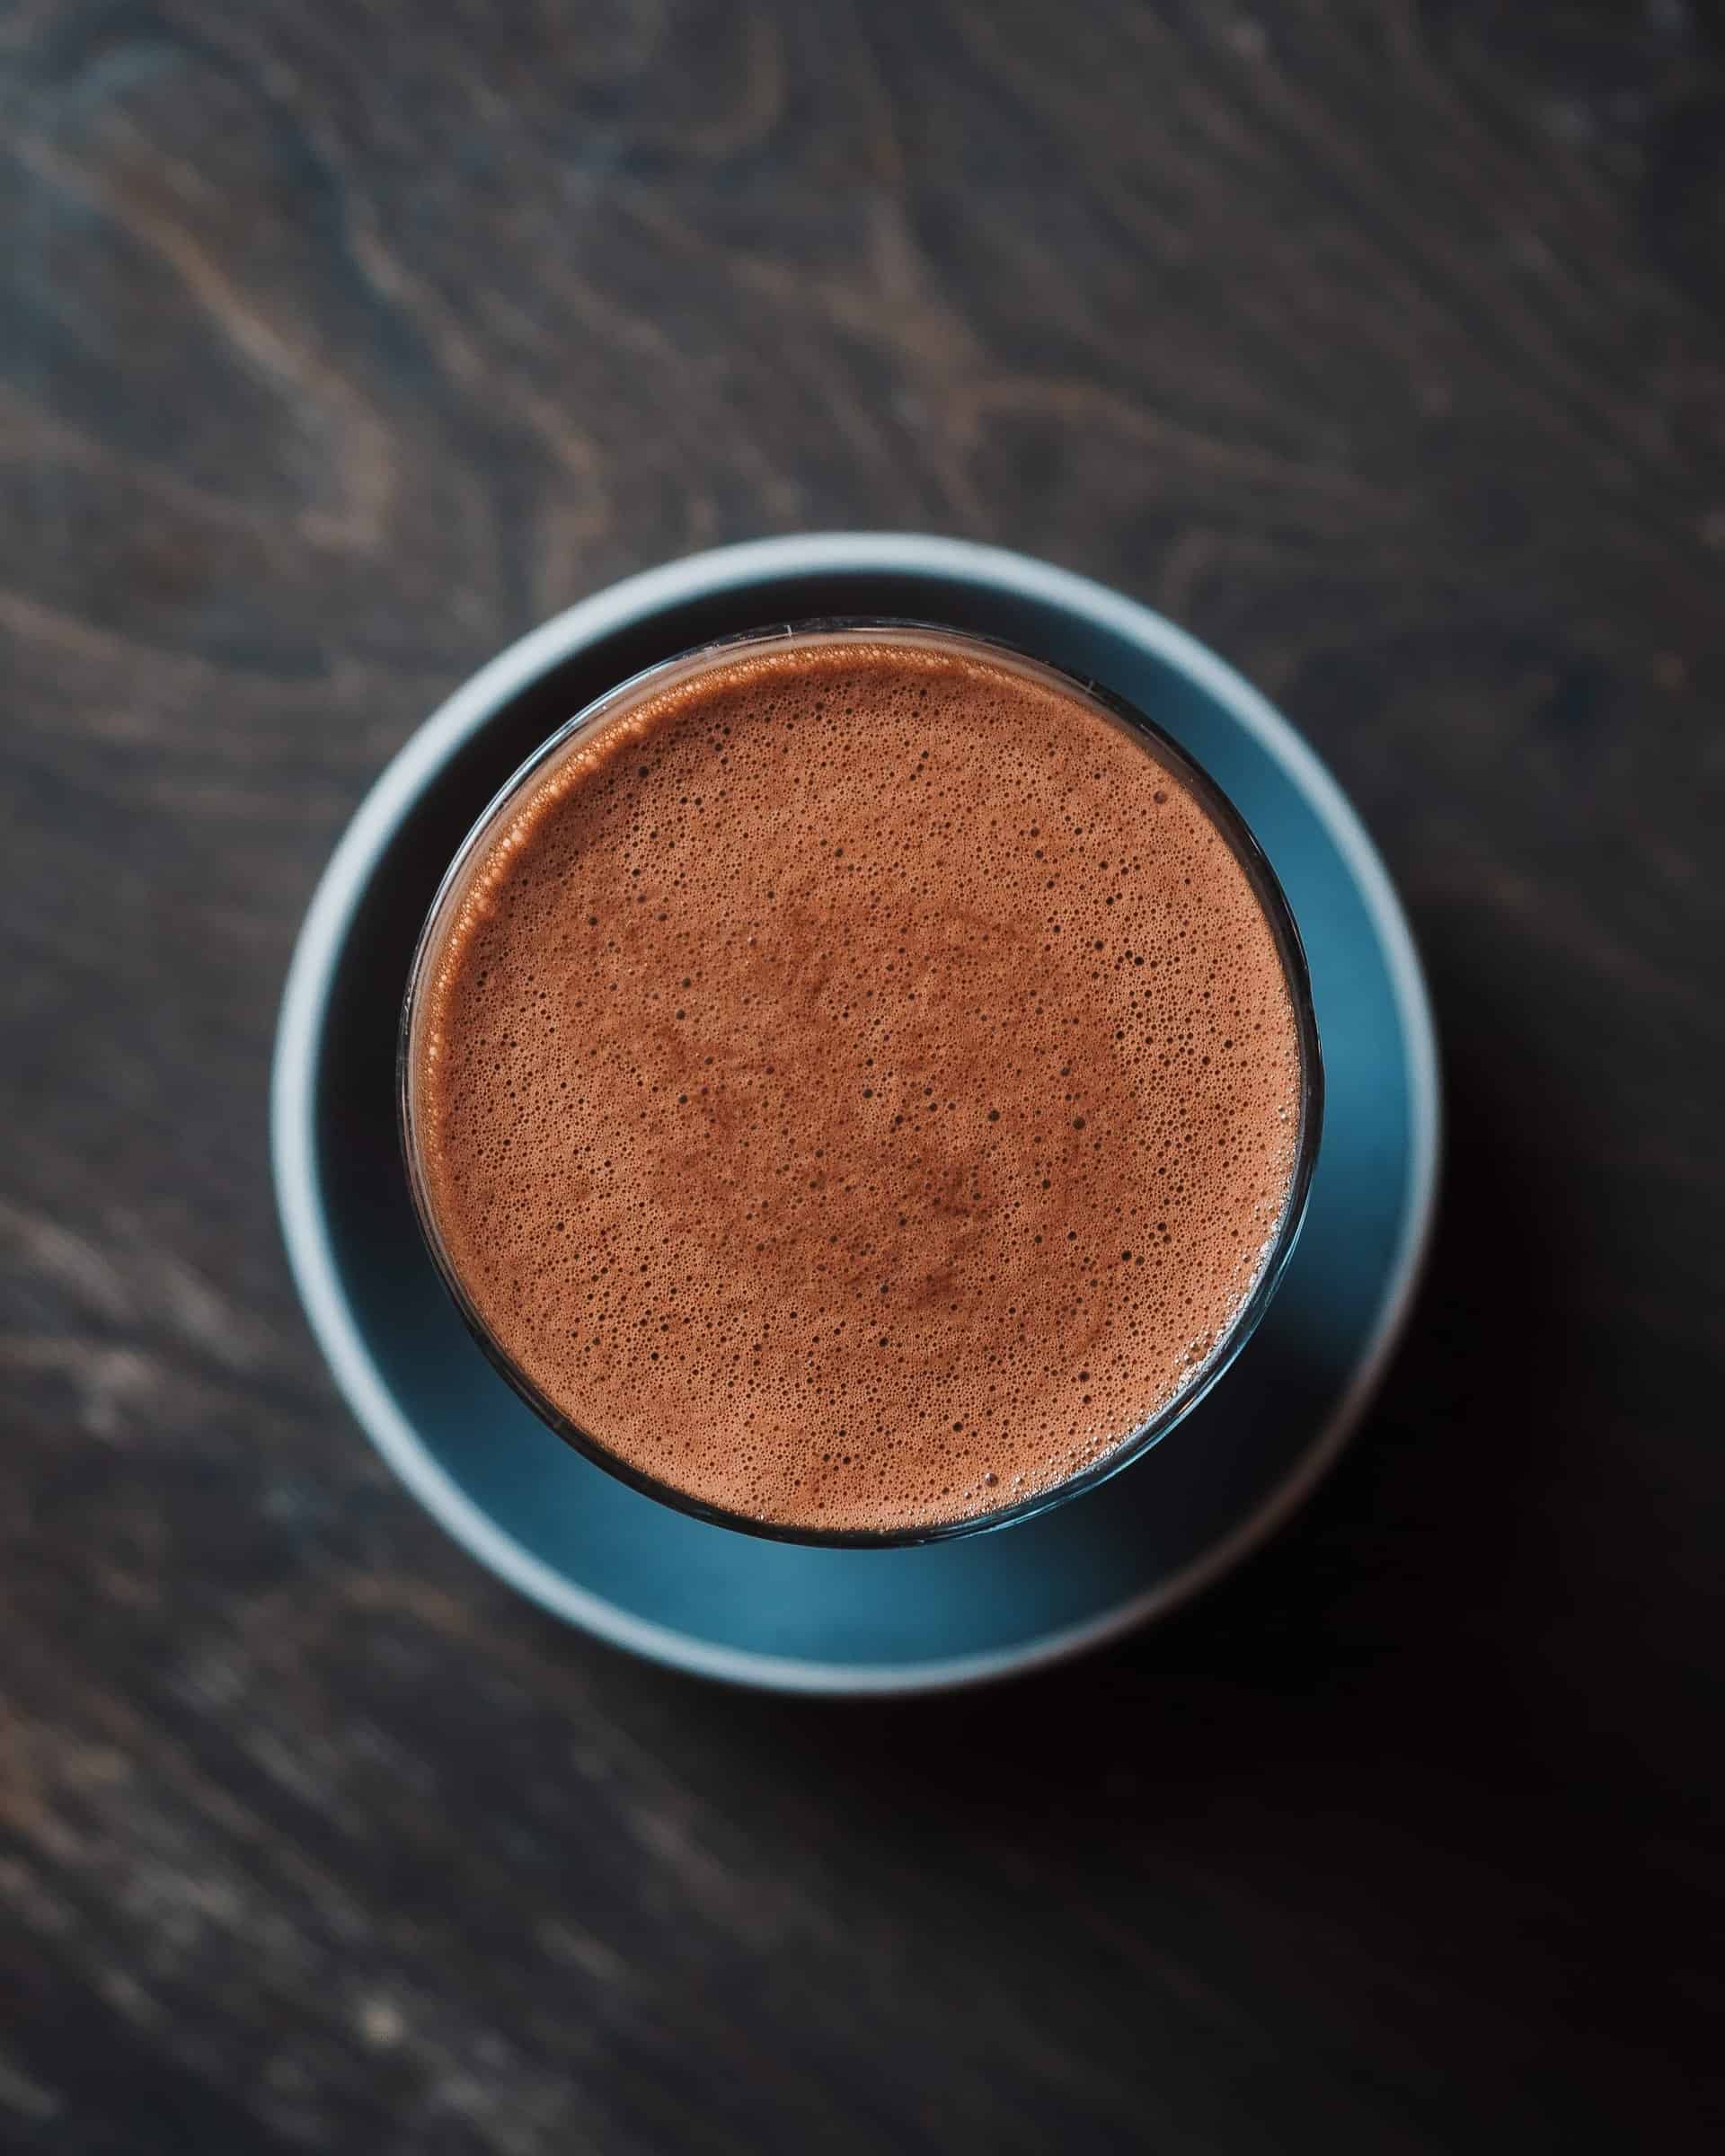 Hot chocolate blue bowl on dark background shot from above.